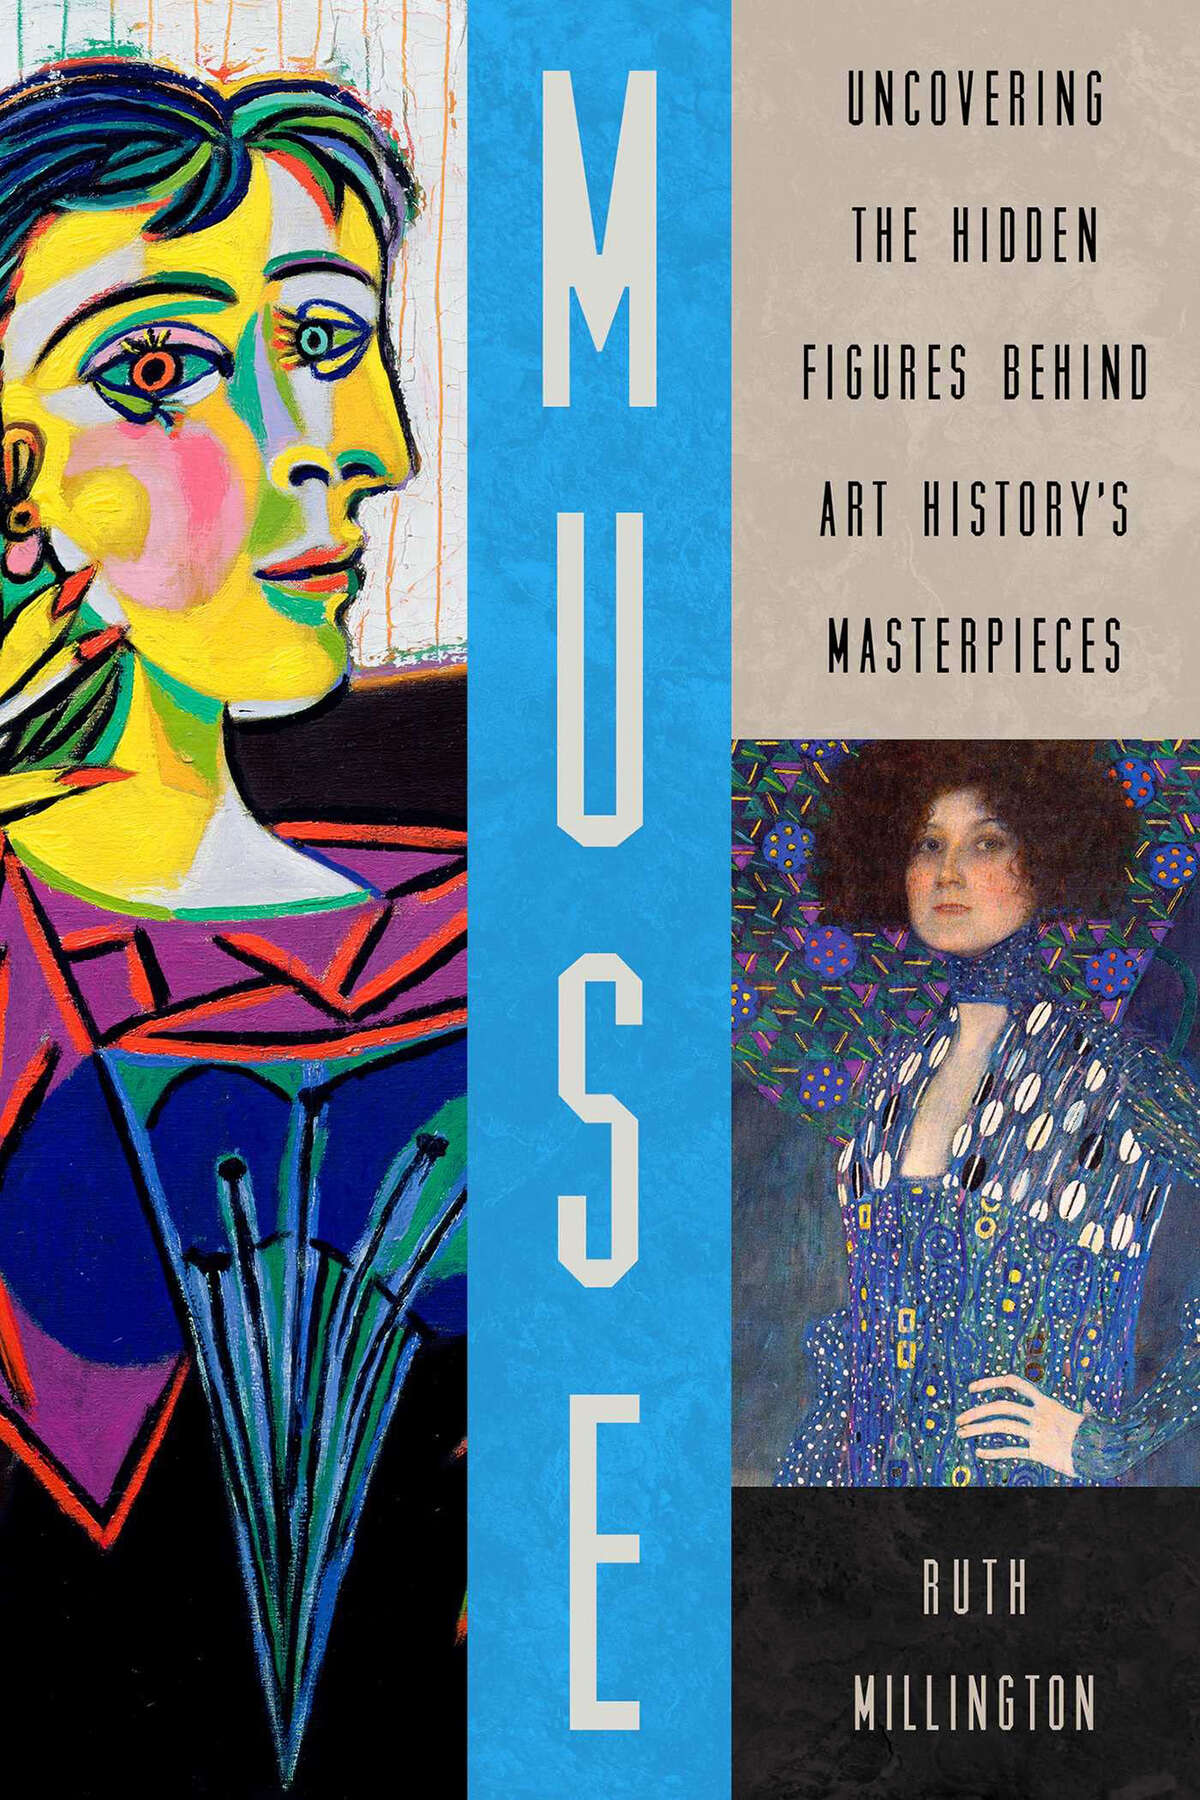 "Muse: Uncovering the Hidden Figures Behind Art History’s Masterpieces"